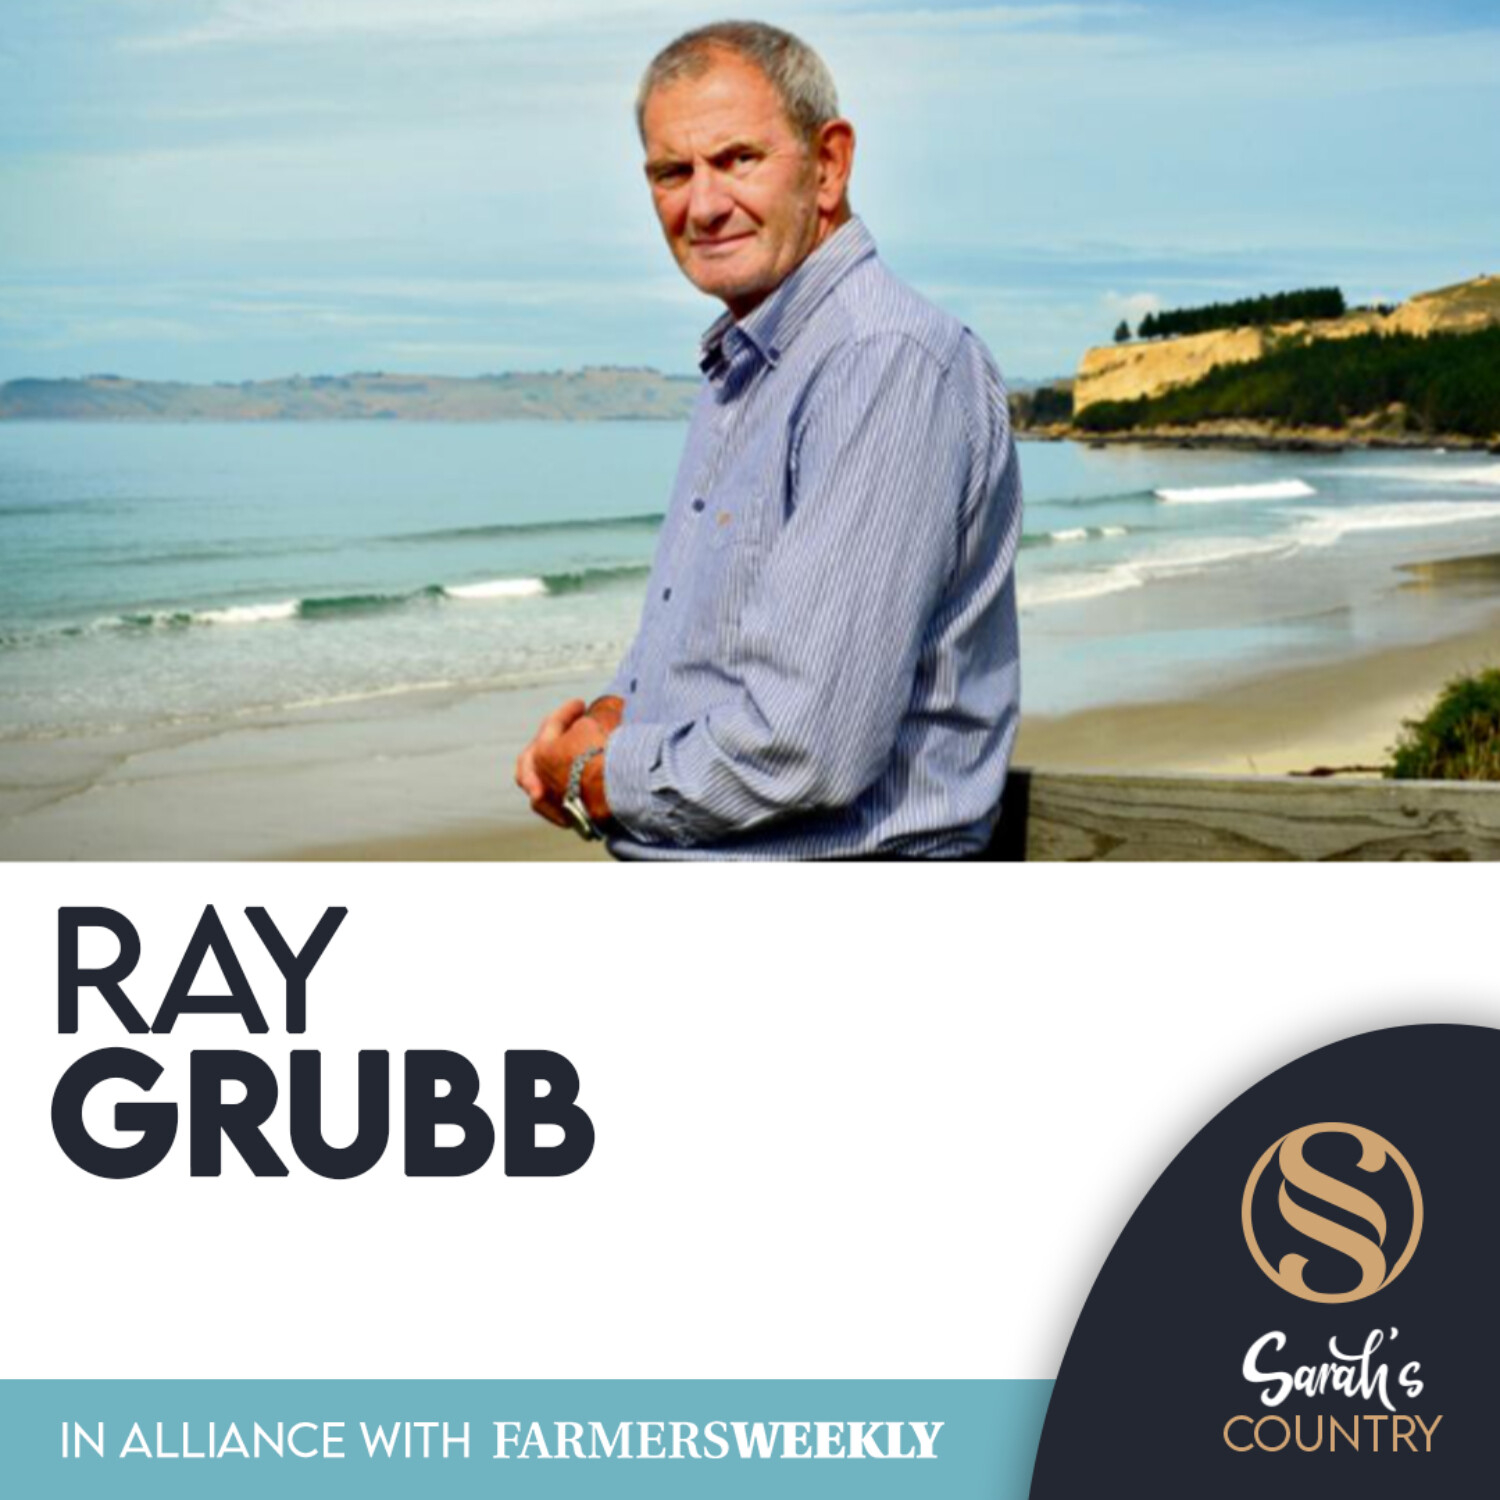 Ray Grubb | “New direction for Fish & Game”